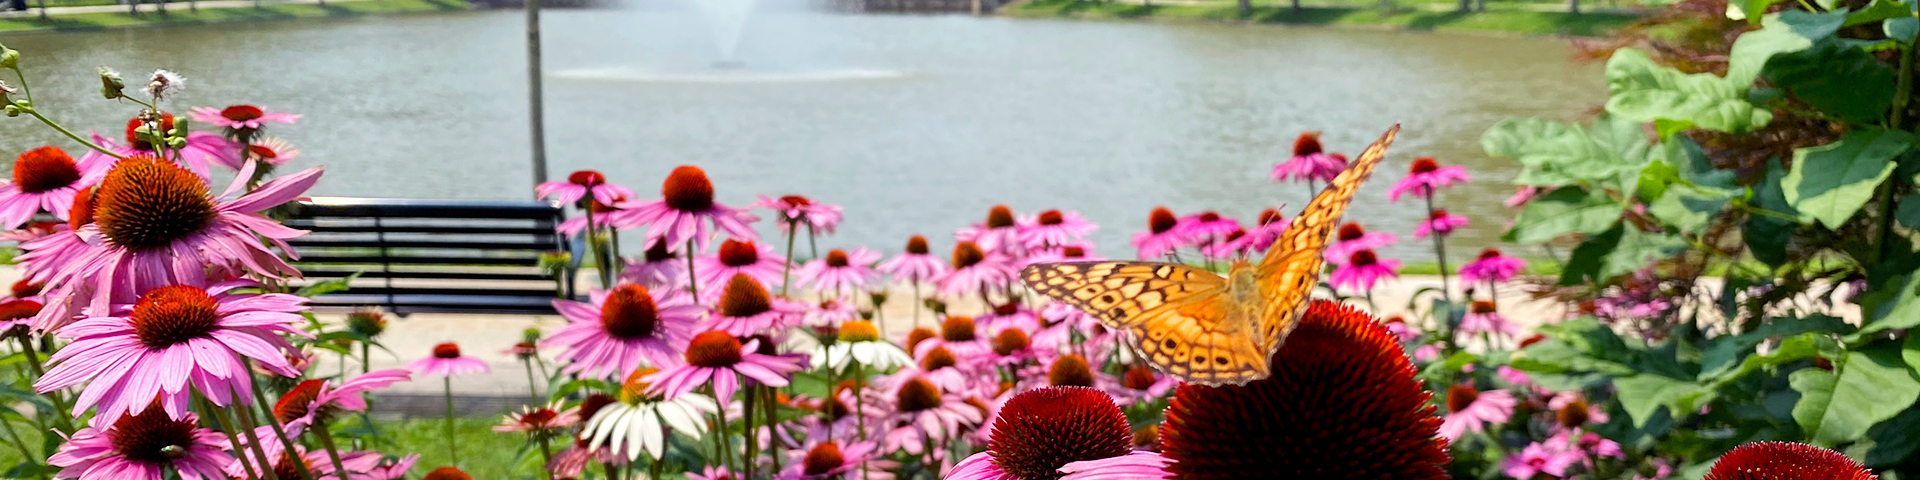 A butterfly sitting on a flower in the foreground with the reflecting pond in the background